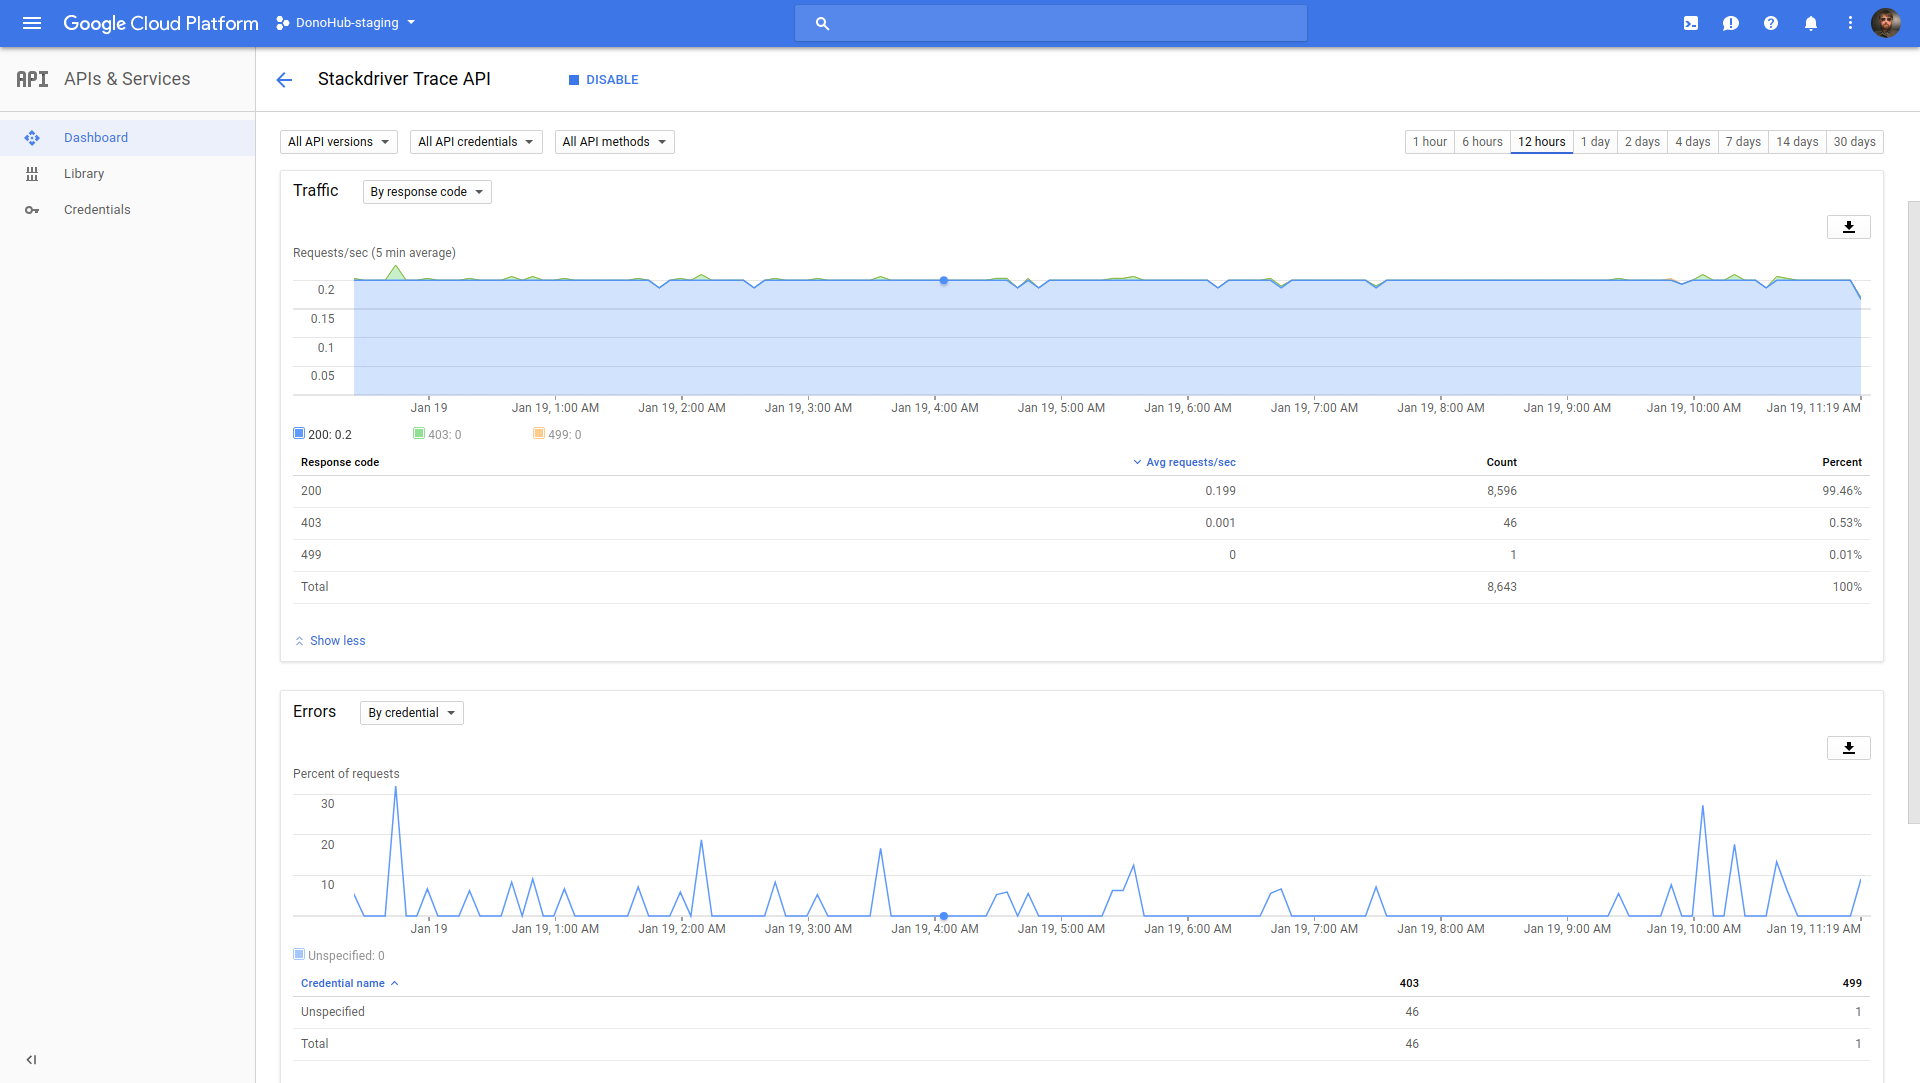 Screenshot of Stackdriver Trace API dashboard showing traffic and error charts